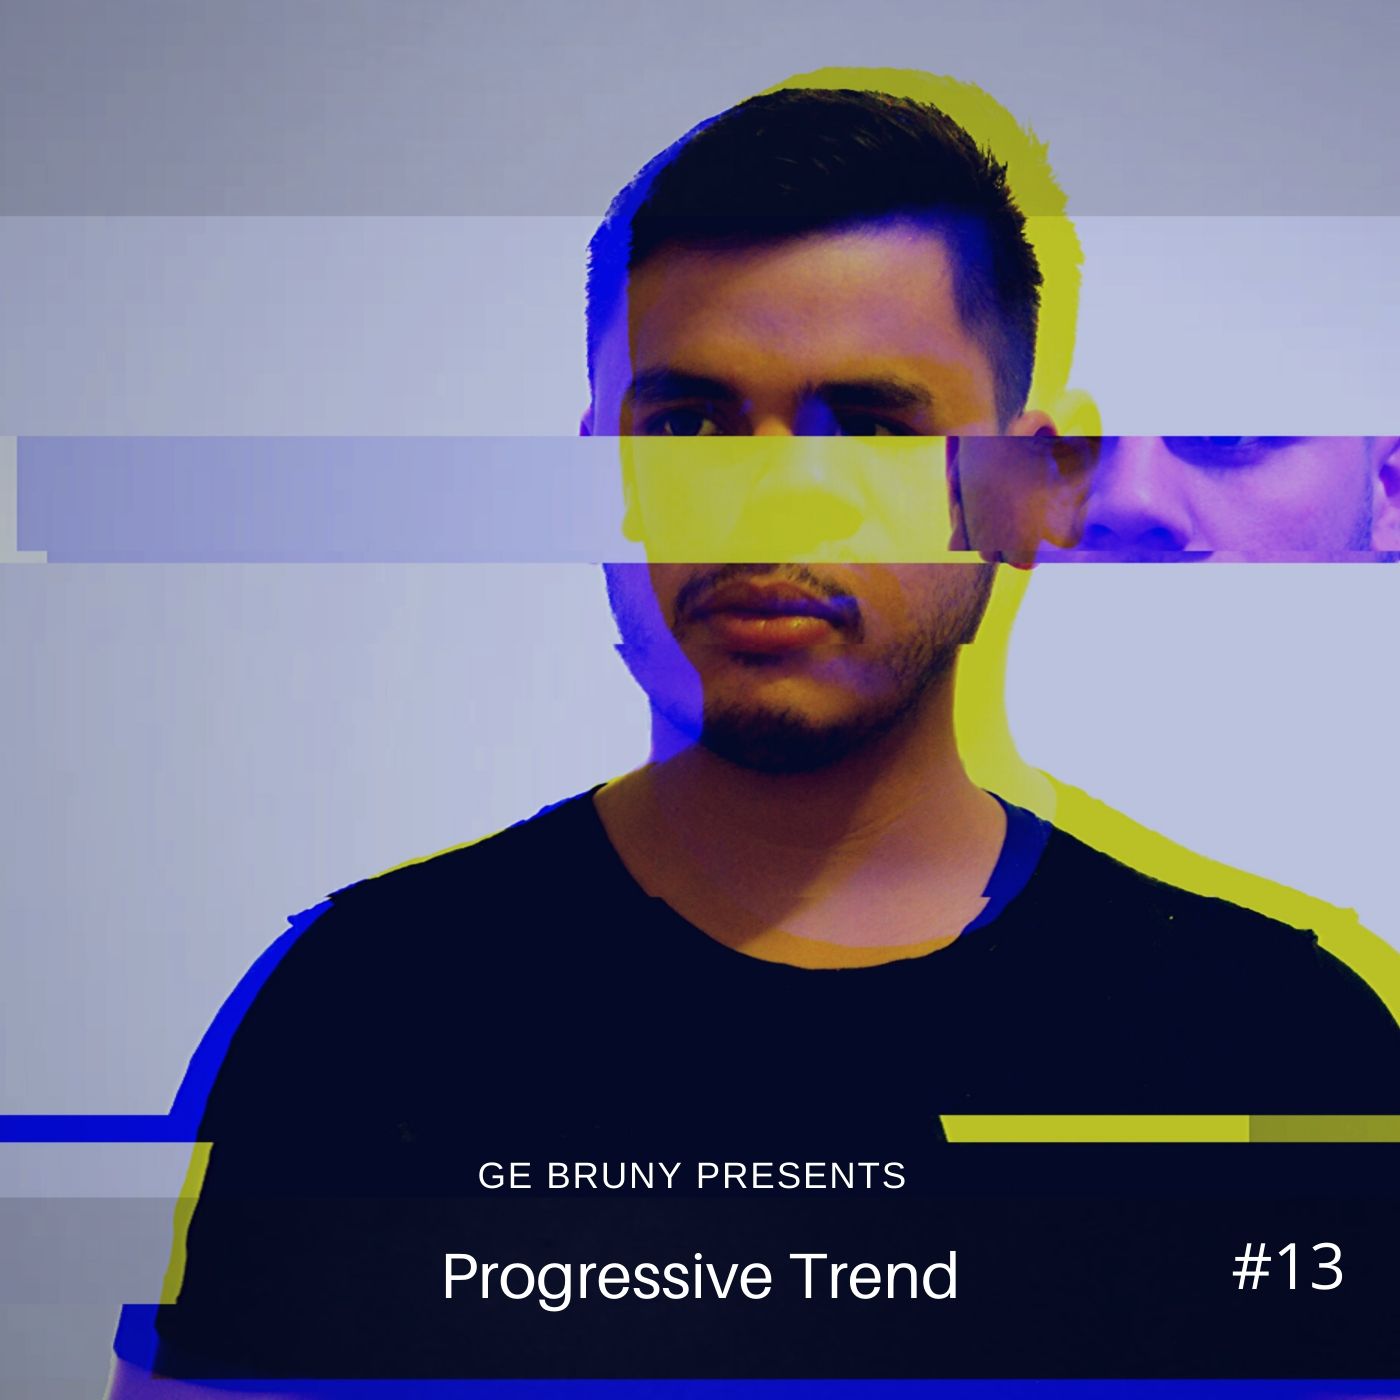 Ge Bruny presents: Progressive Trend :: Episode 013 (aired on April 4th, 2020) banner logo